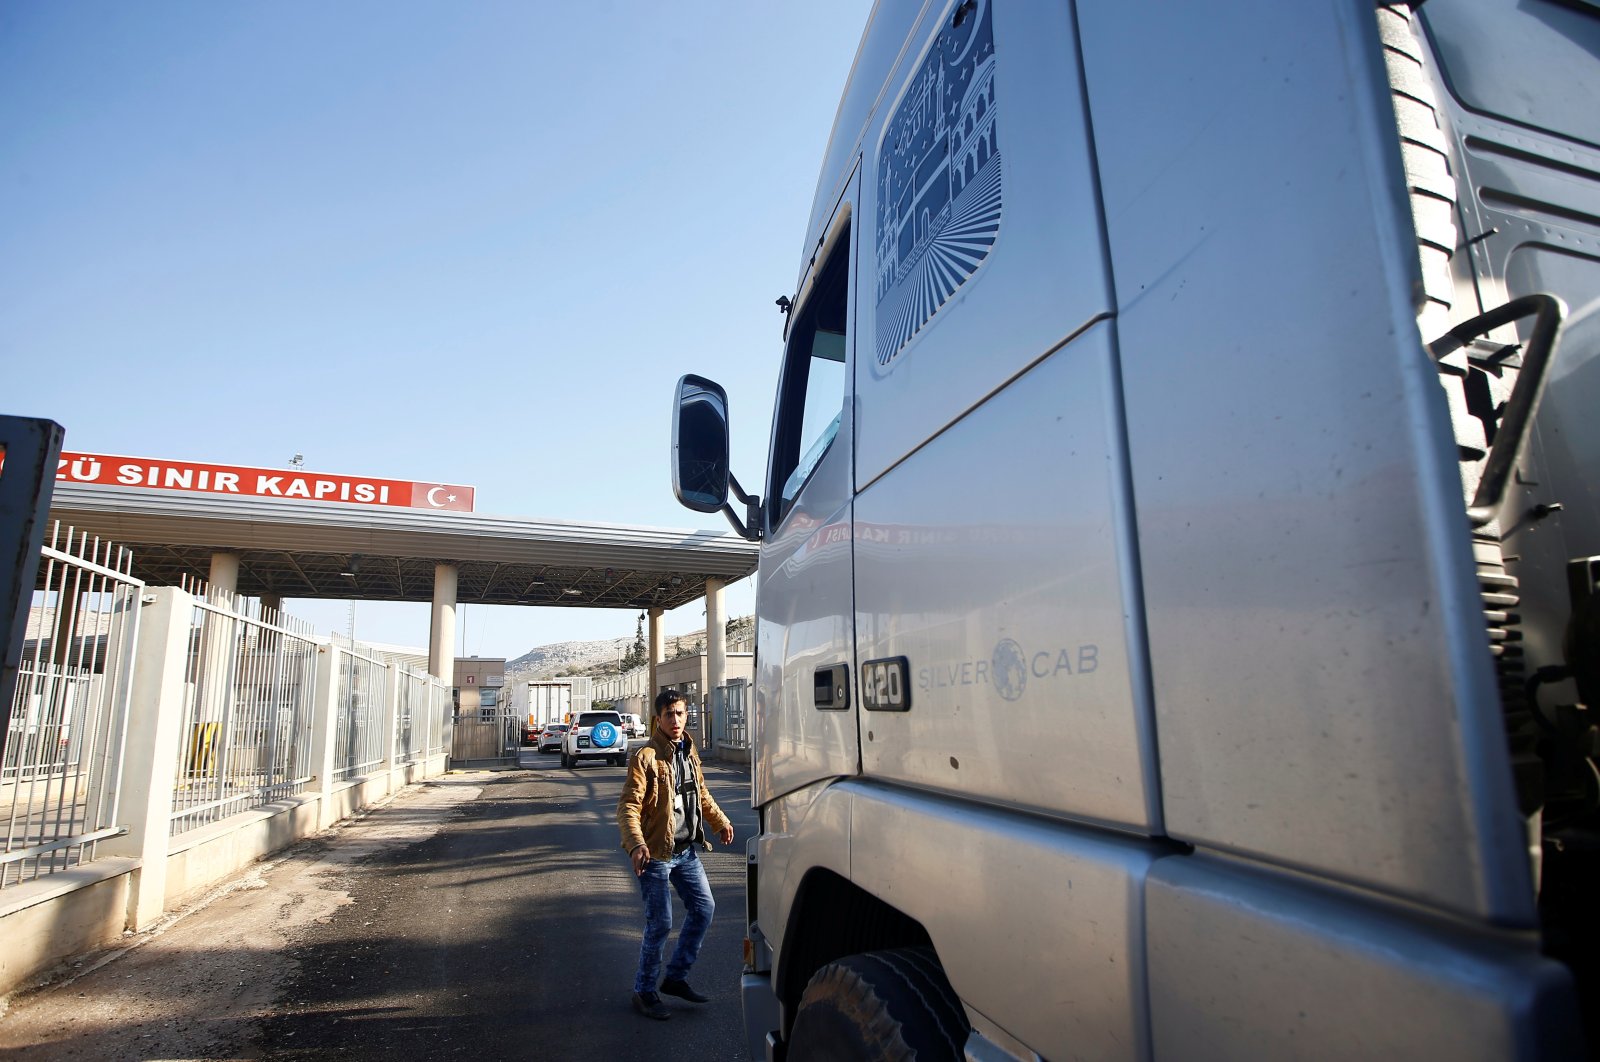 Syria-bound trucks, loaded with humanitarian supplies, arrive at Cilvegözü border gate, located opposite Syrian commercial crossing point Bab al-Hawa in Reyhanlı, in the southern Hatay province, Turkey, Nov. 28, 2016. (Reuters File Photo)